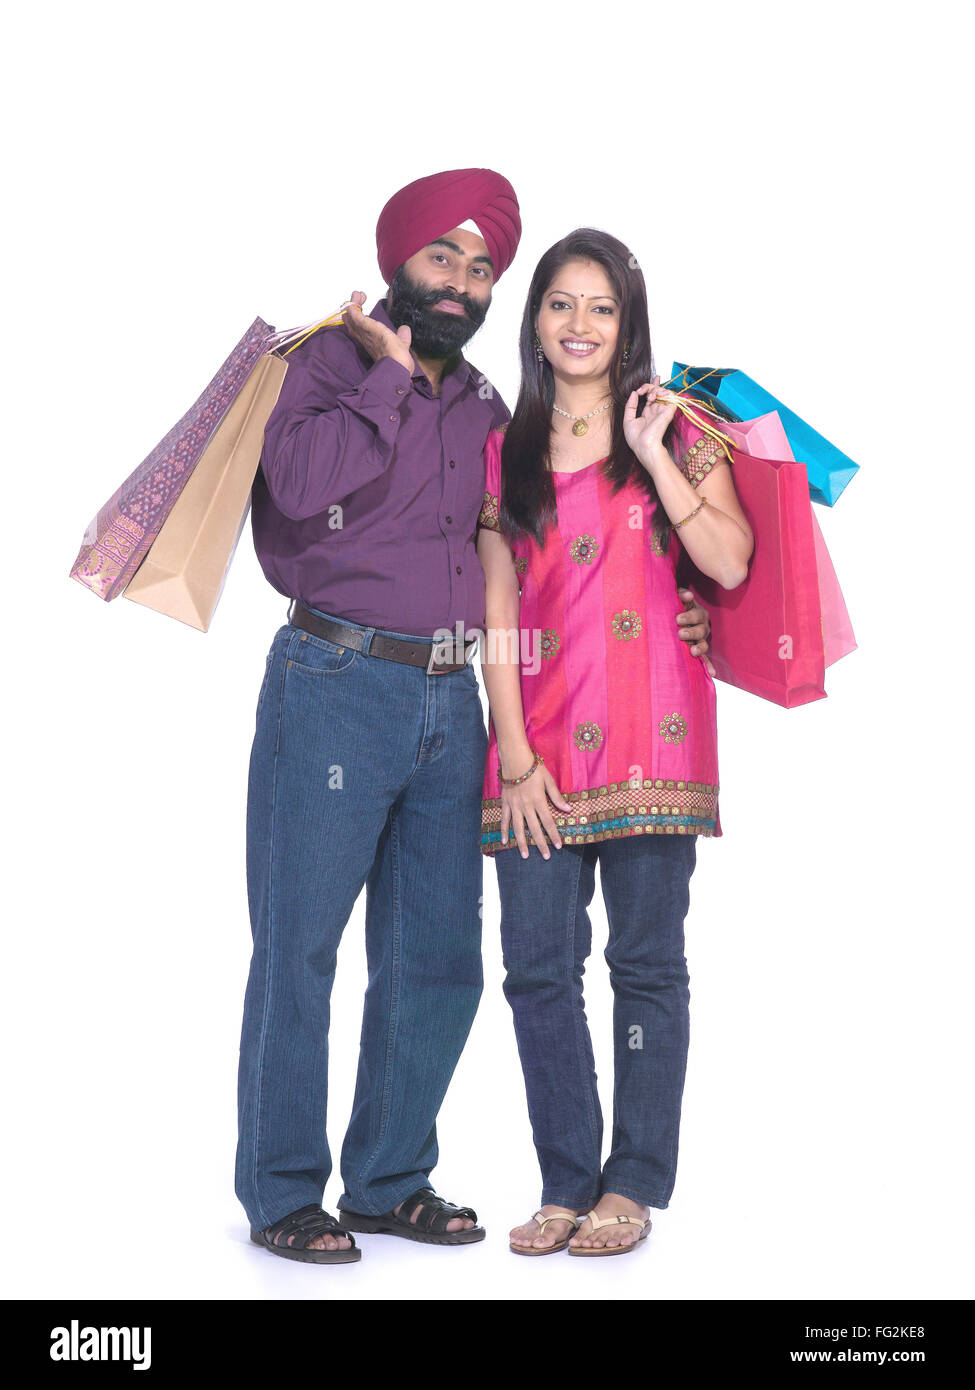 Sikh man and woman holding colourful shopping bags standing close to each other MR#702Z;779A Stock Photo